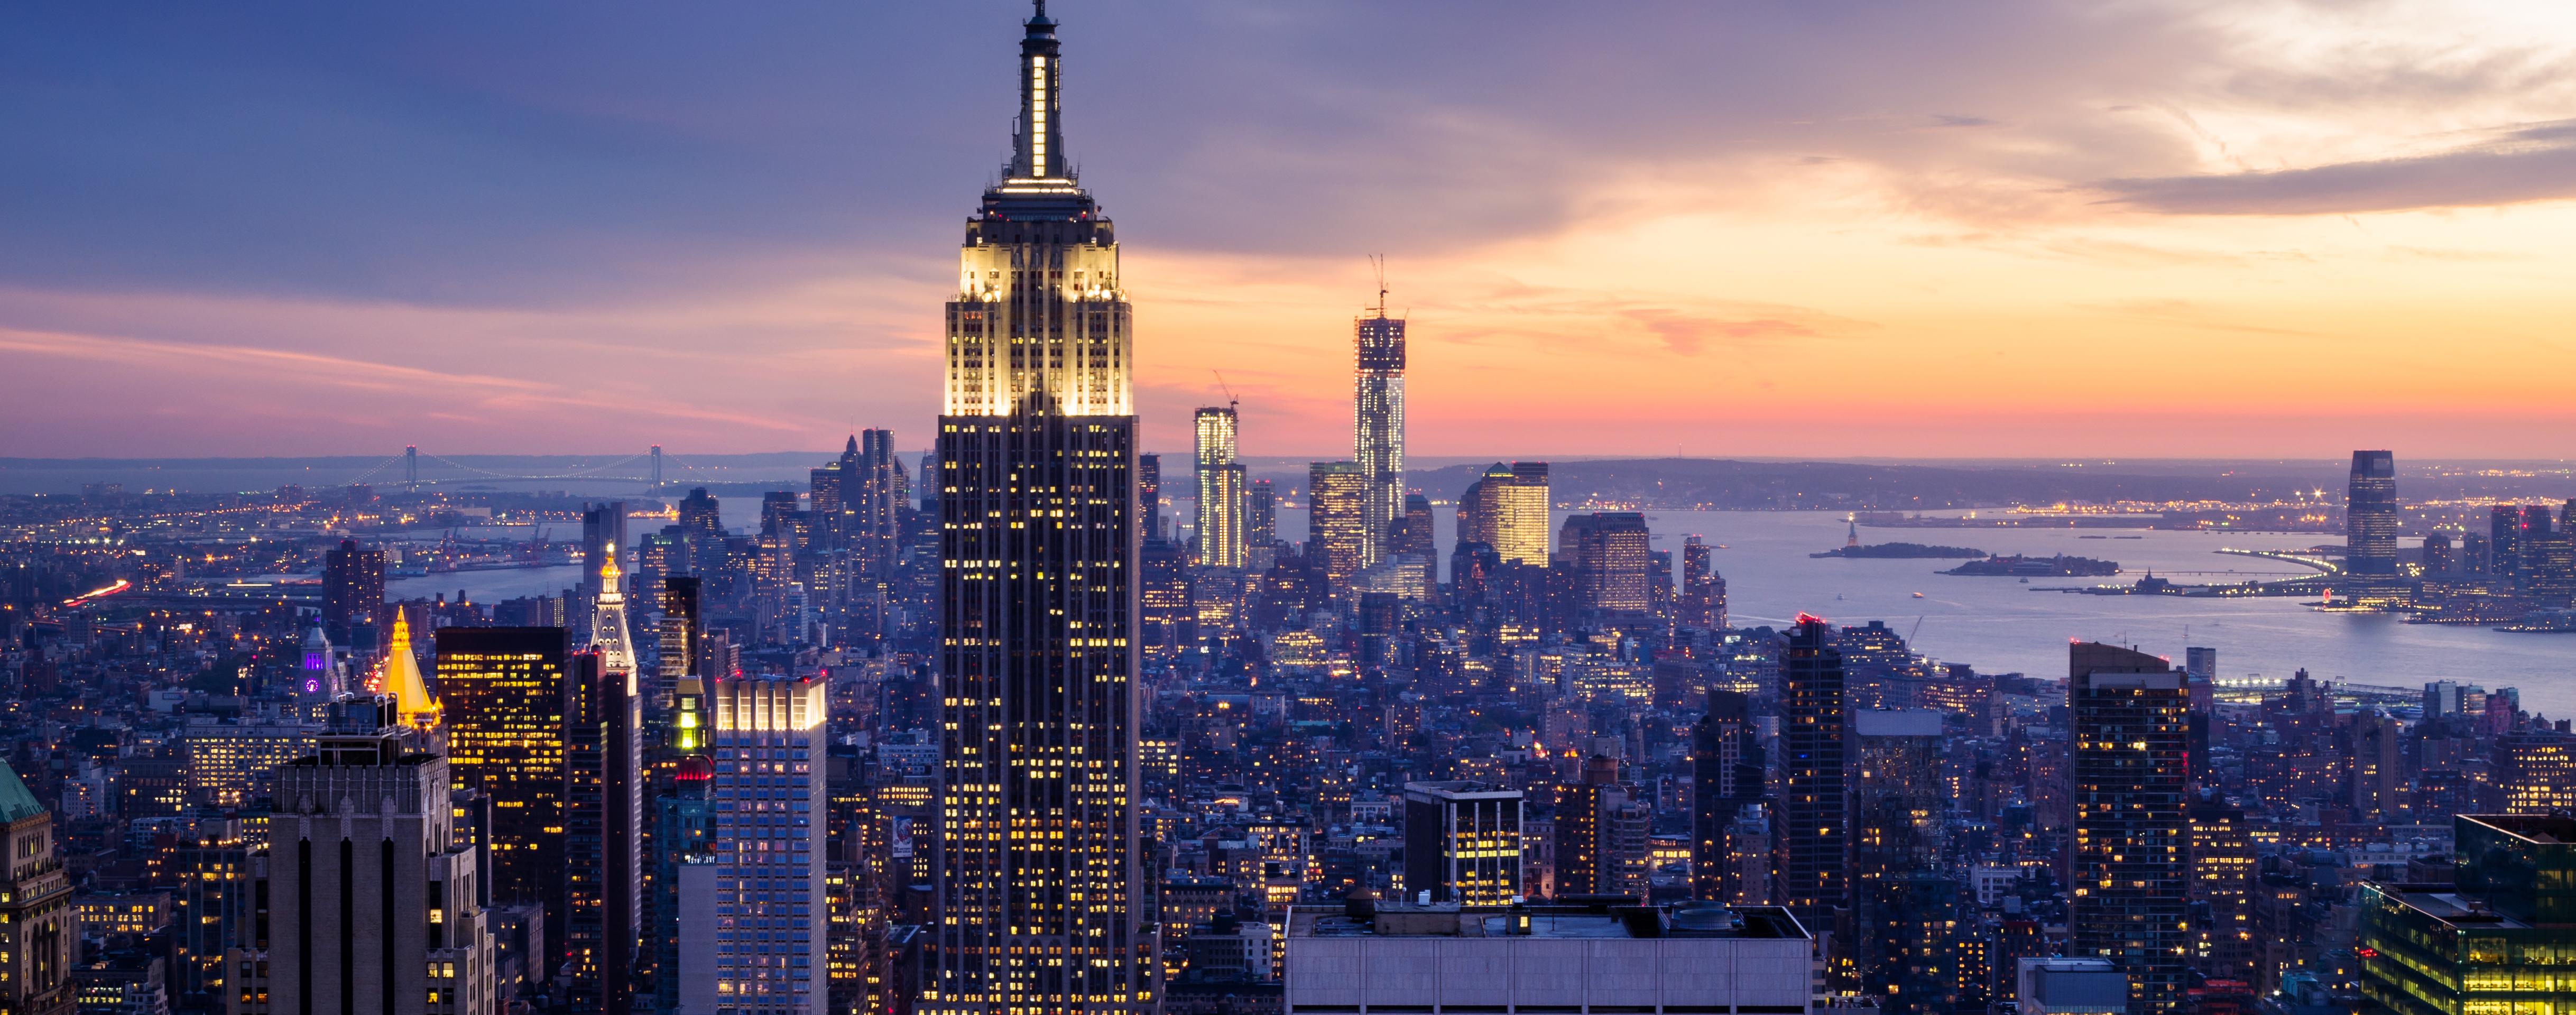 VIP Access to the Empire State Building – Express Pass to the 86th floor